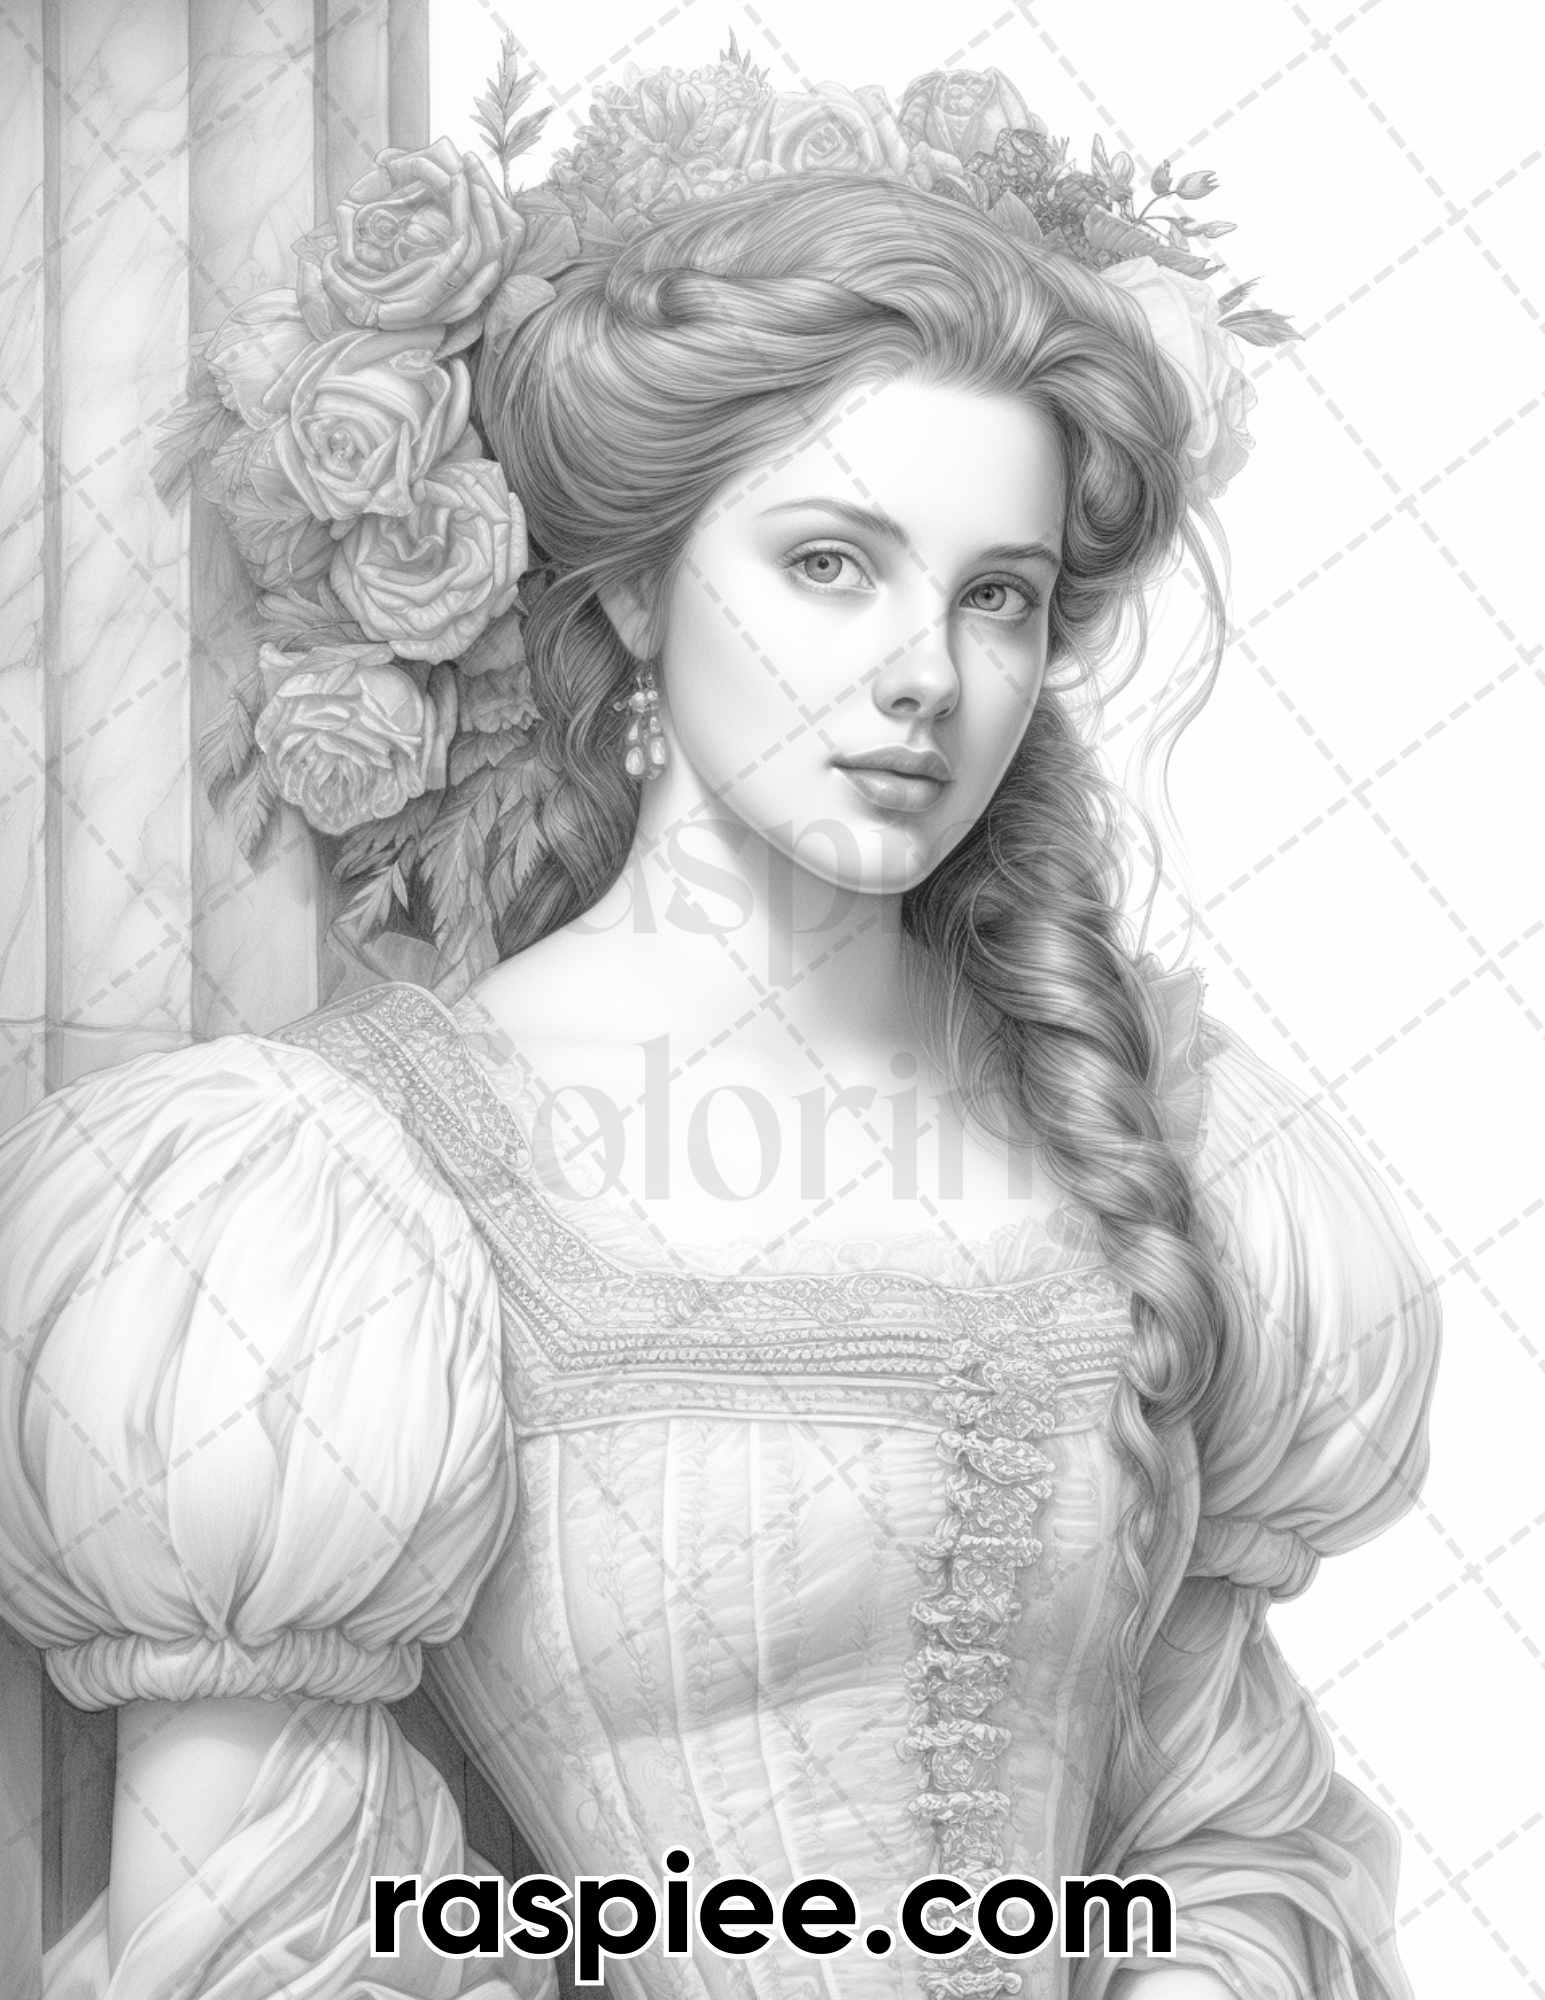 adult coloring pages, adult coloring sheets, adult coloring book pdf, adult coloring book printable, grayscale coloring pages, grayscale coloring books, portrait coloring pages for adults, portrait coloring book, vintage coloring pages, renaissance coloring pages